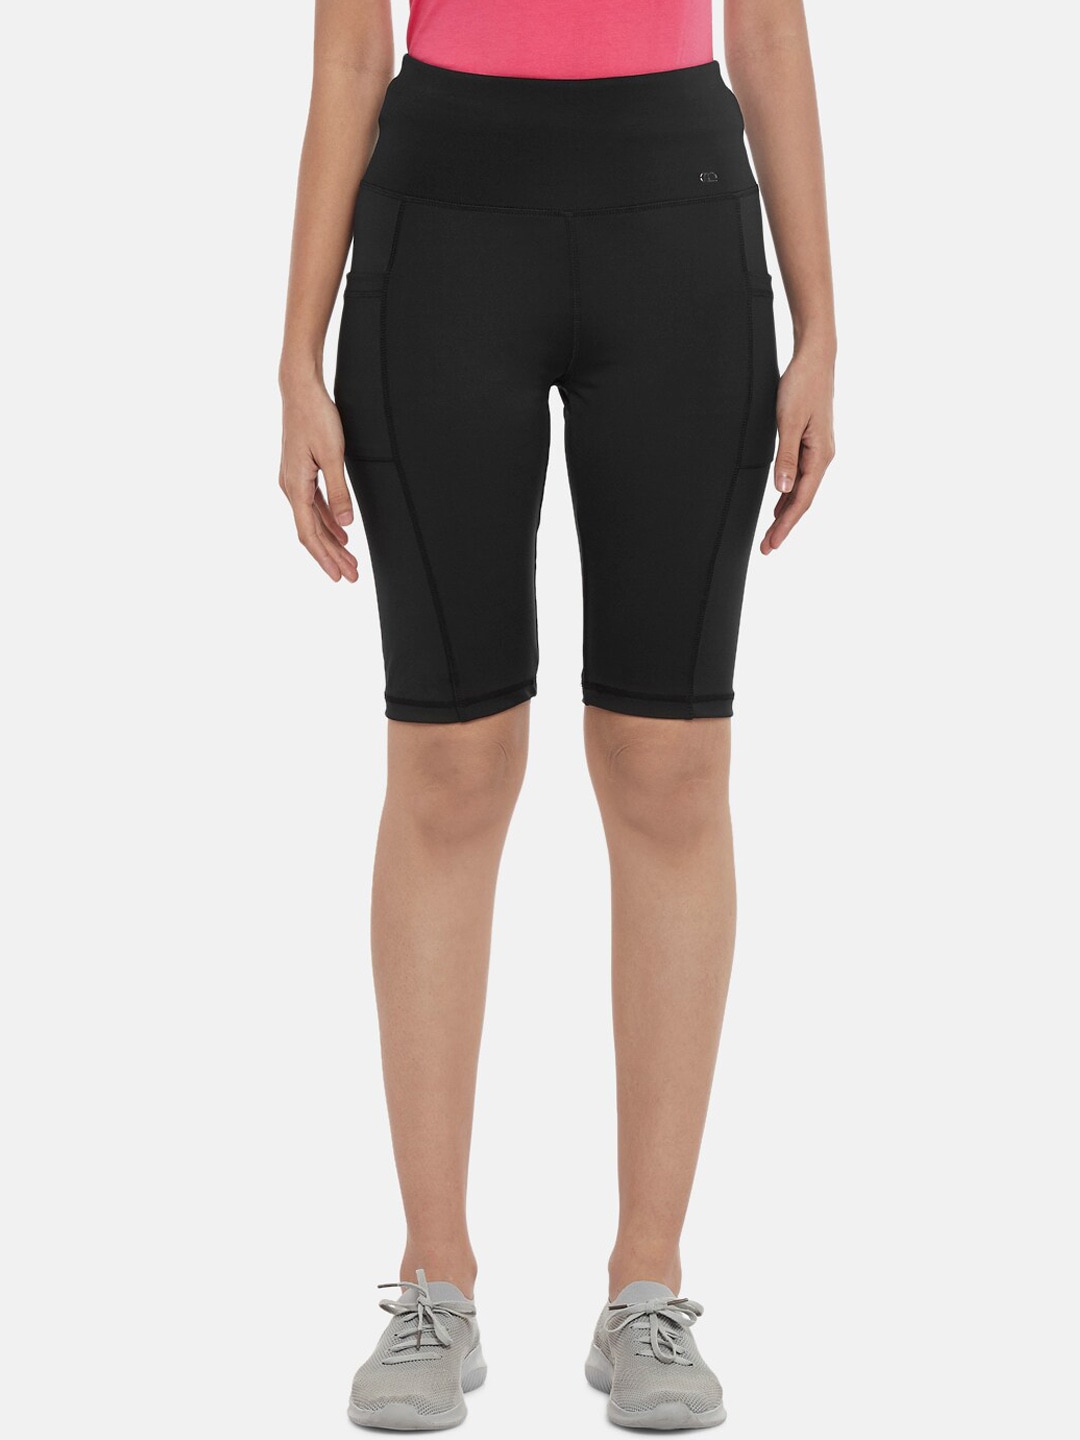 Ajile by Pantaloons Women Black Solid Sports Shorts Price in India